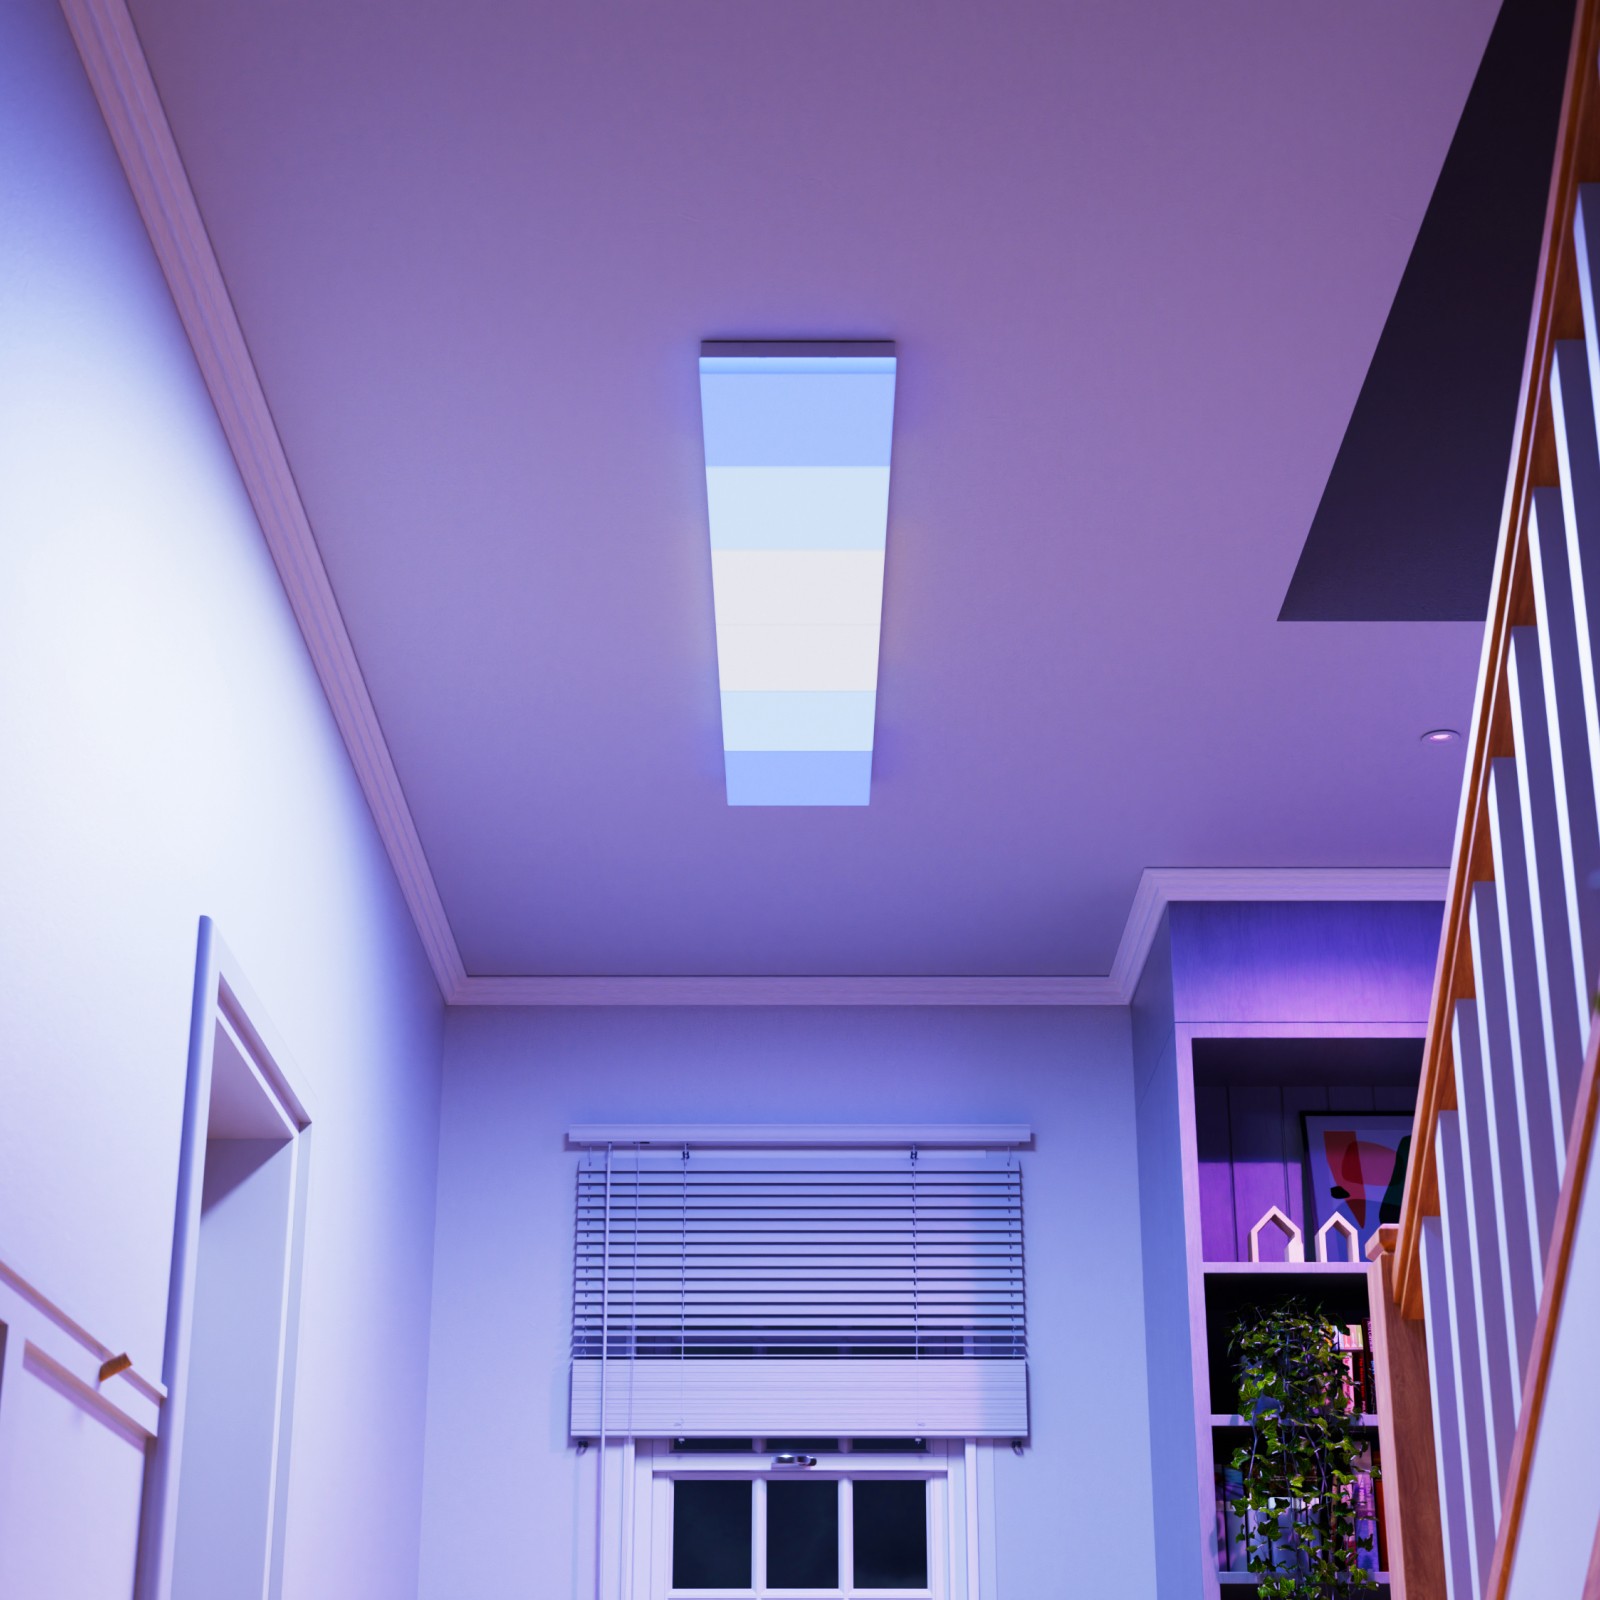 Products LED » United | & Shop IoT Smart States Products » Lighting Nanoleaf Consumer